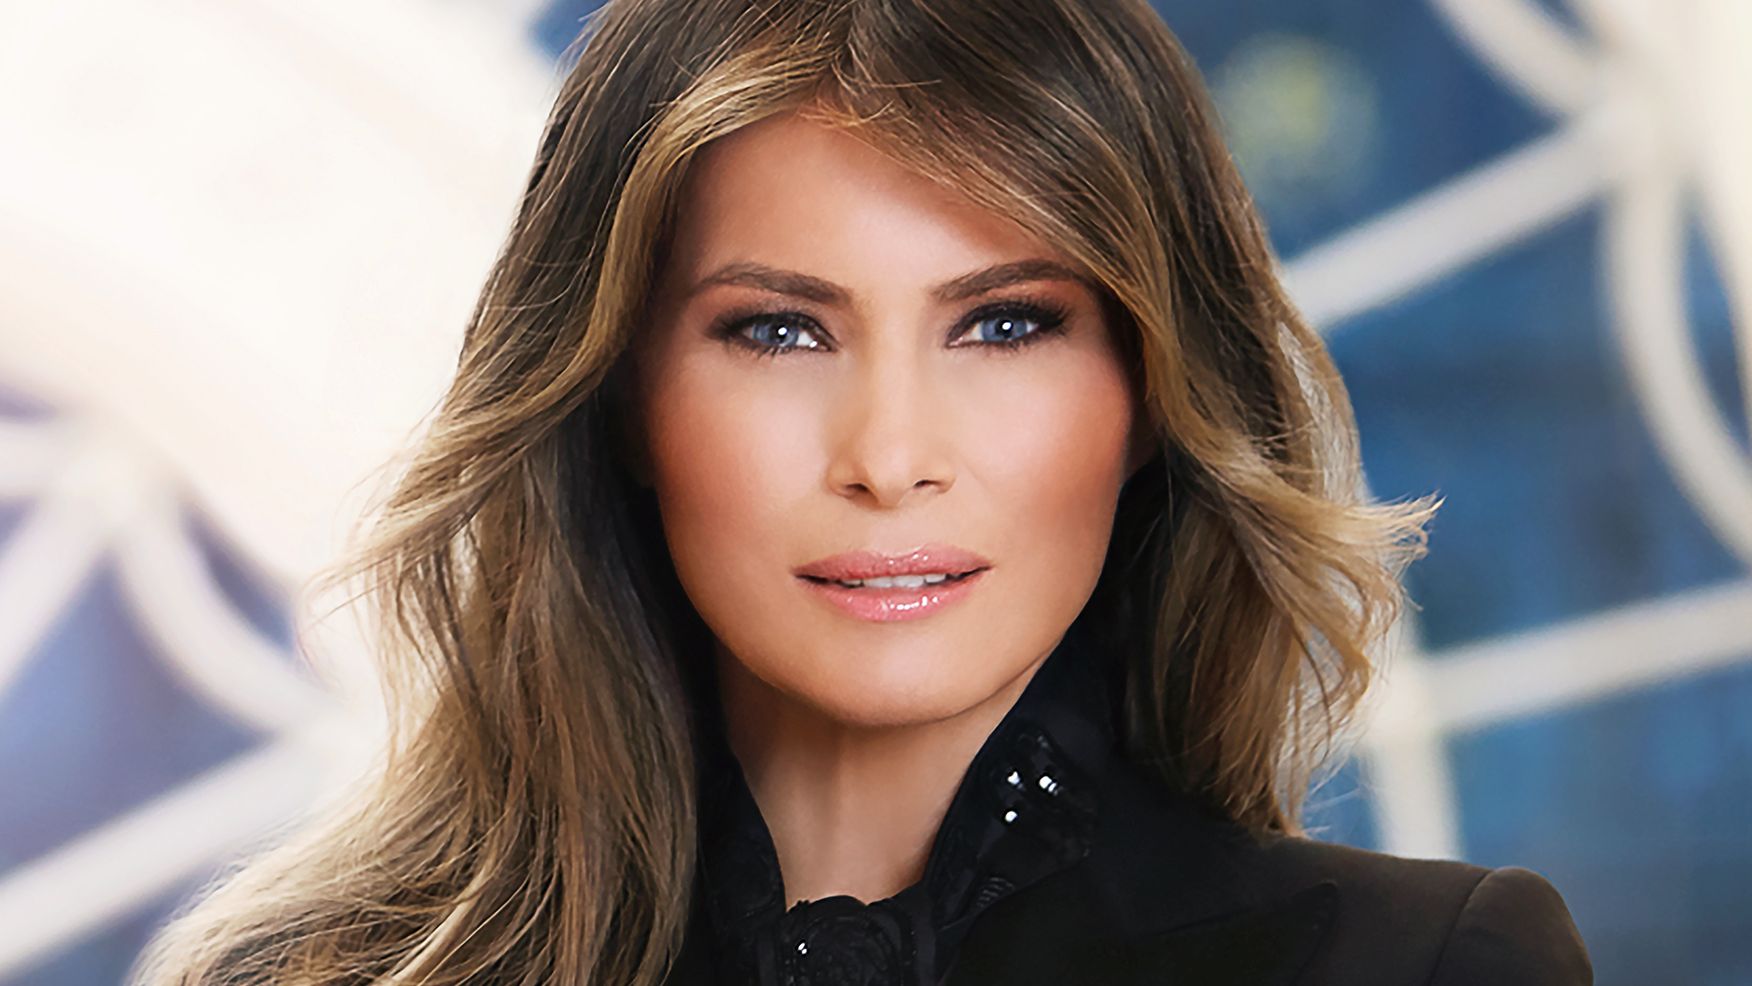 Perma-peeved: Melania Trump's White House photo (plus 11 other revealing  first lady portraits)